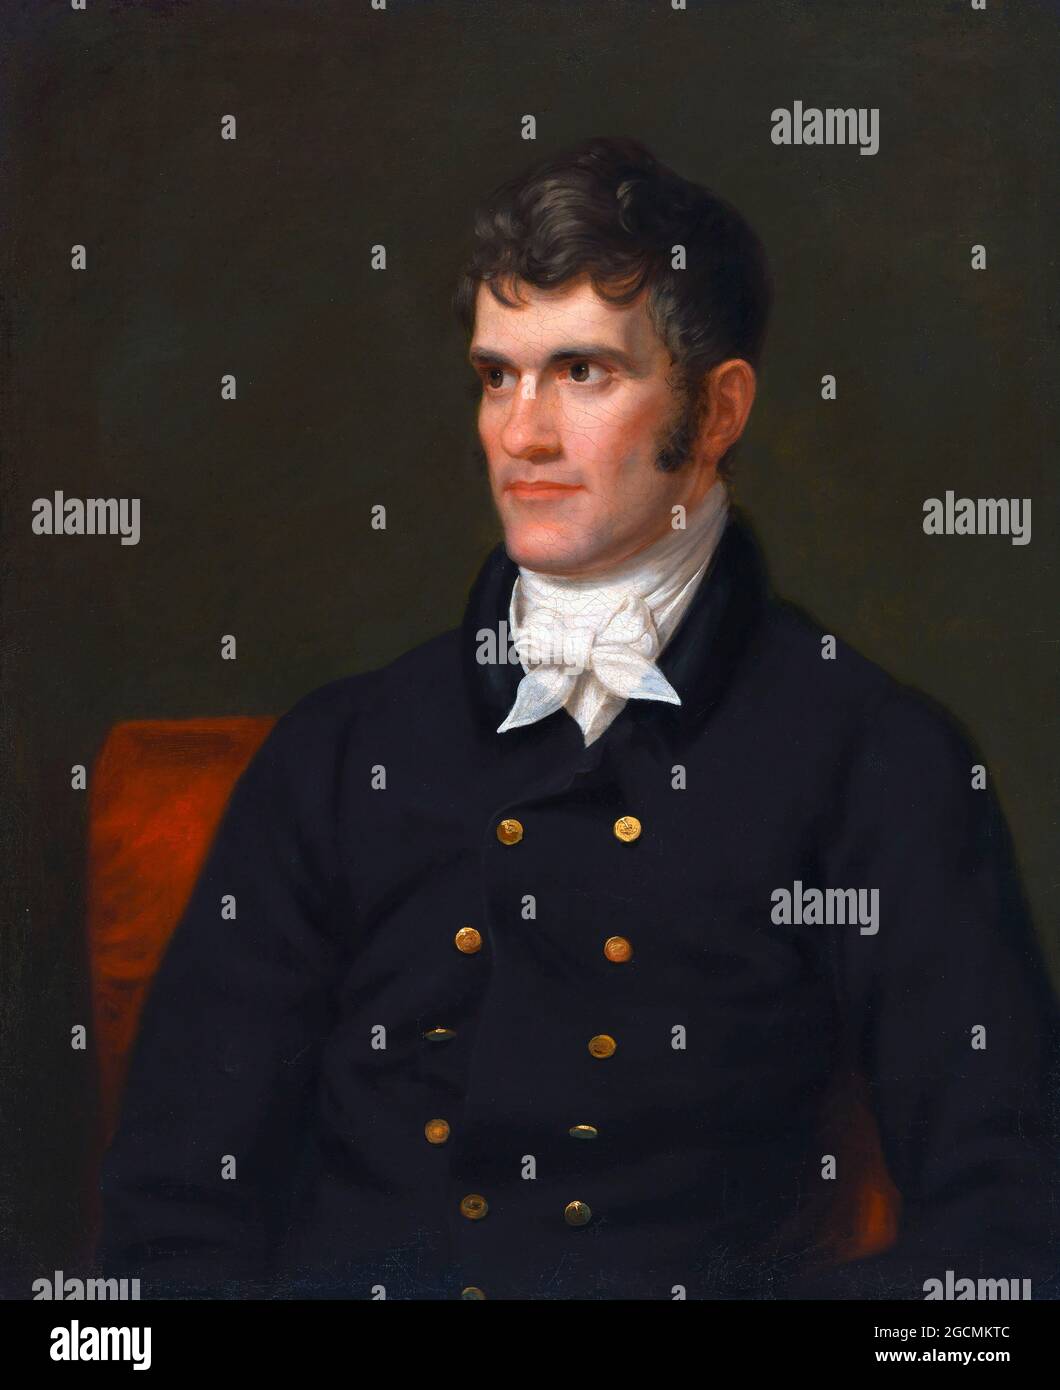 John C Calhoun (1782-1850), portrait by Charles Bird King (1785-1862) oil on canvas, 1845. Calhoun was an American statesman from South Carolina, who served as Vice President of the United States twice. He was  a strong defender of slavery and advanced the concept of minority rights in politics, Stock Photo